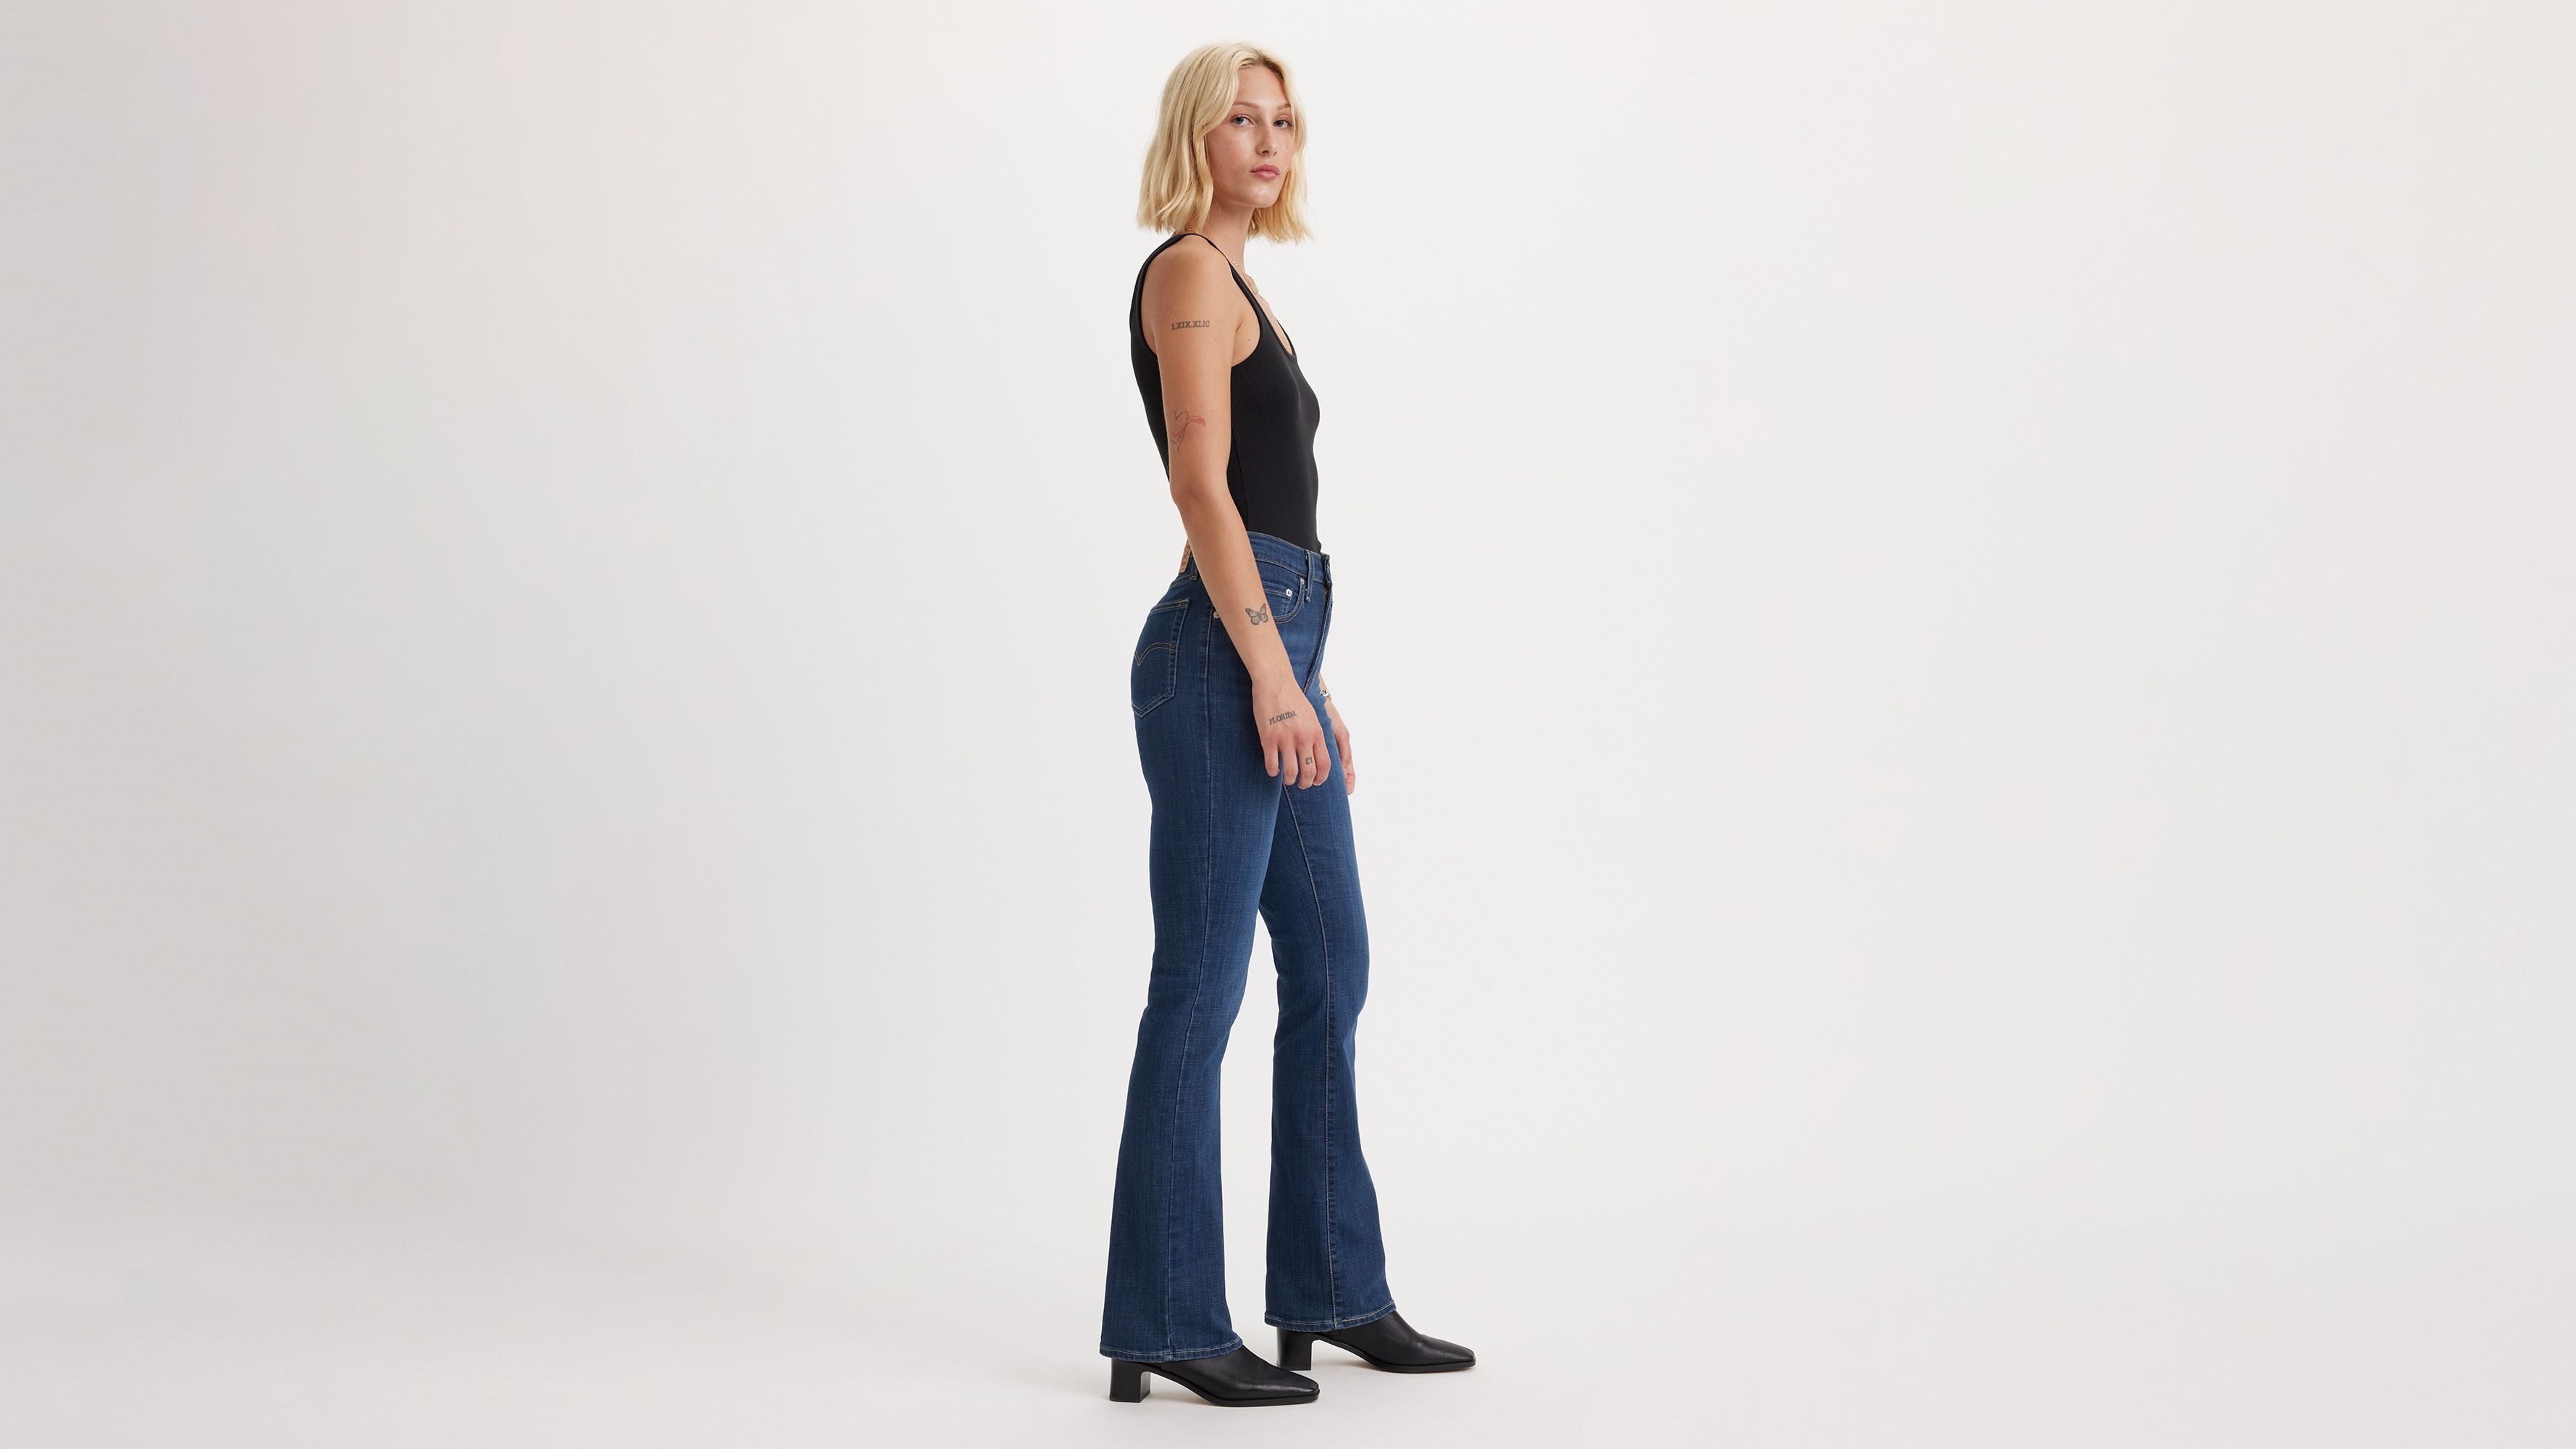 levi's high rise bootcut jeans